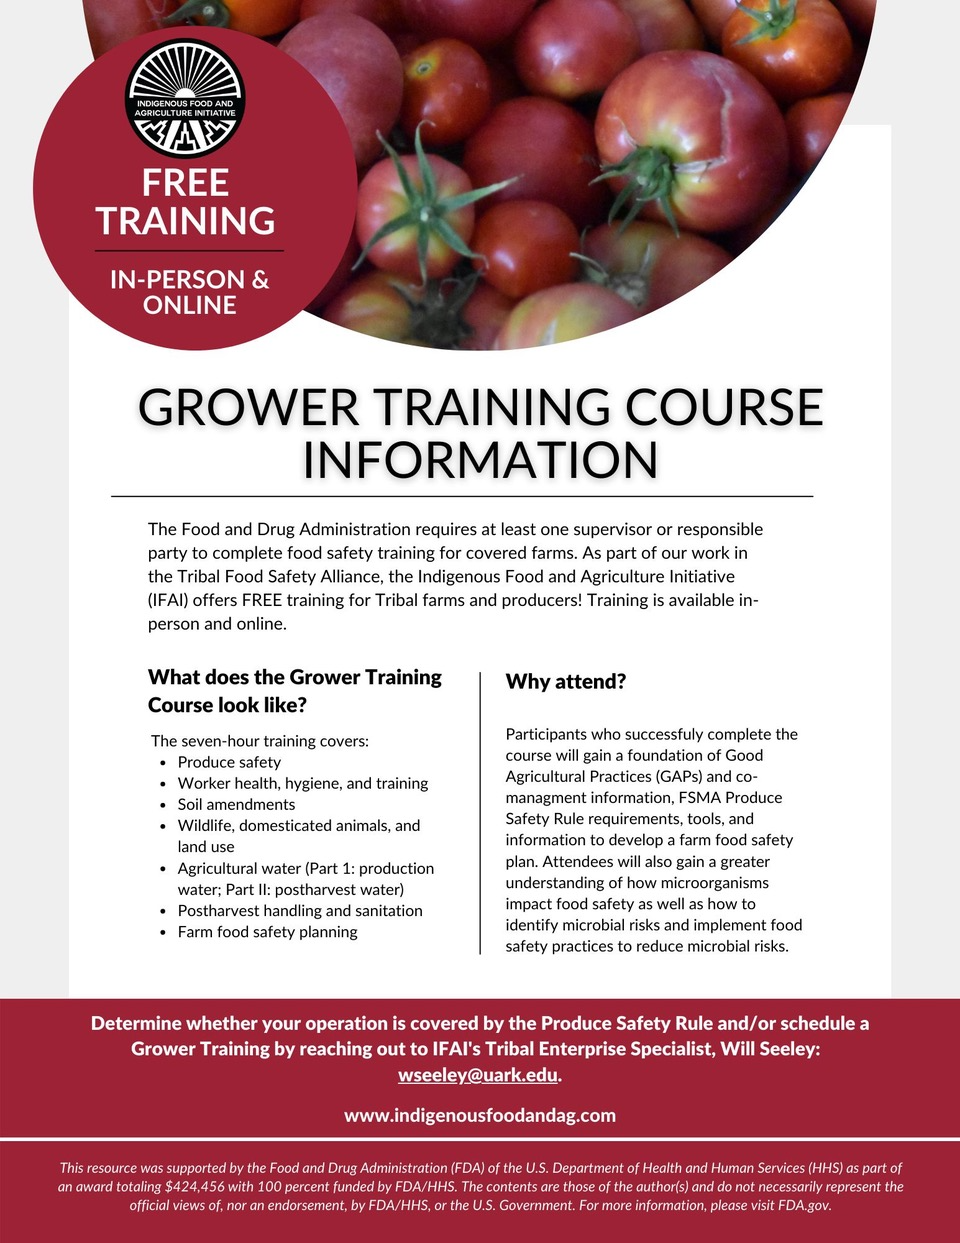 Flyer for Training Course